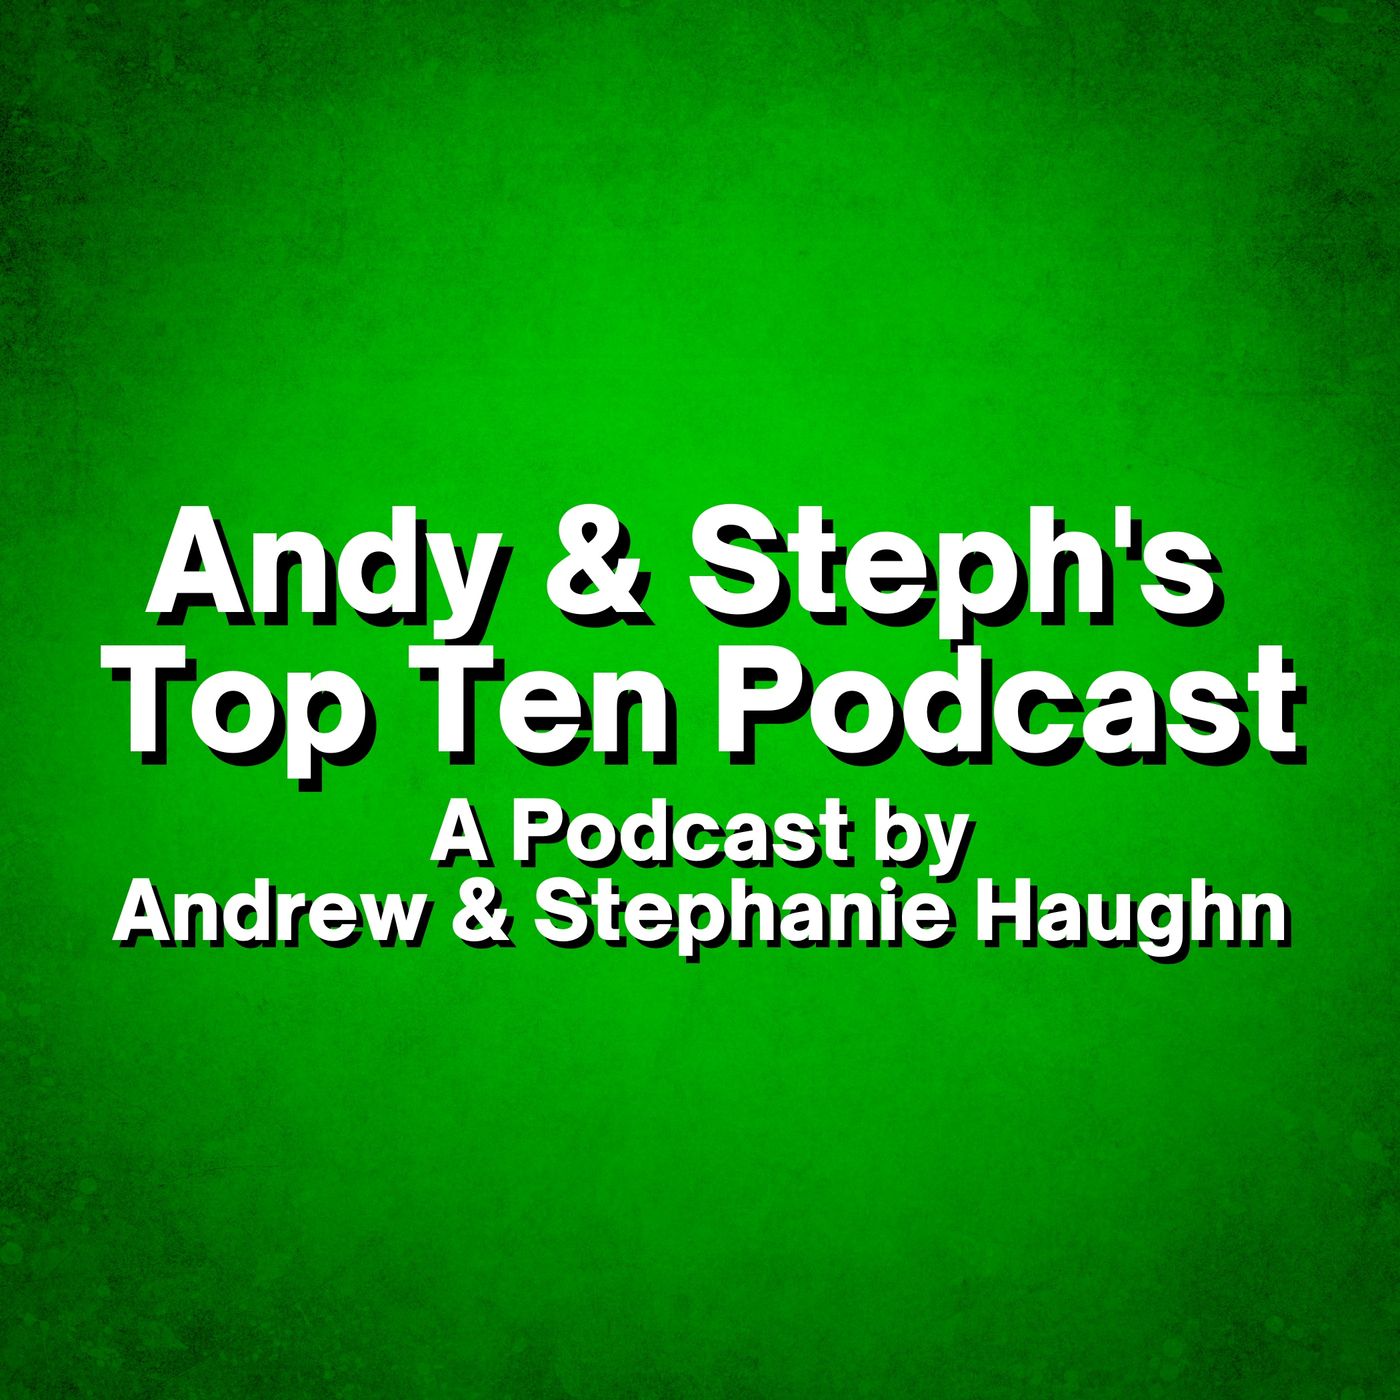 Andy & Steph’s Top Ten Podcast